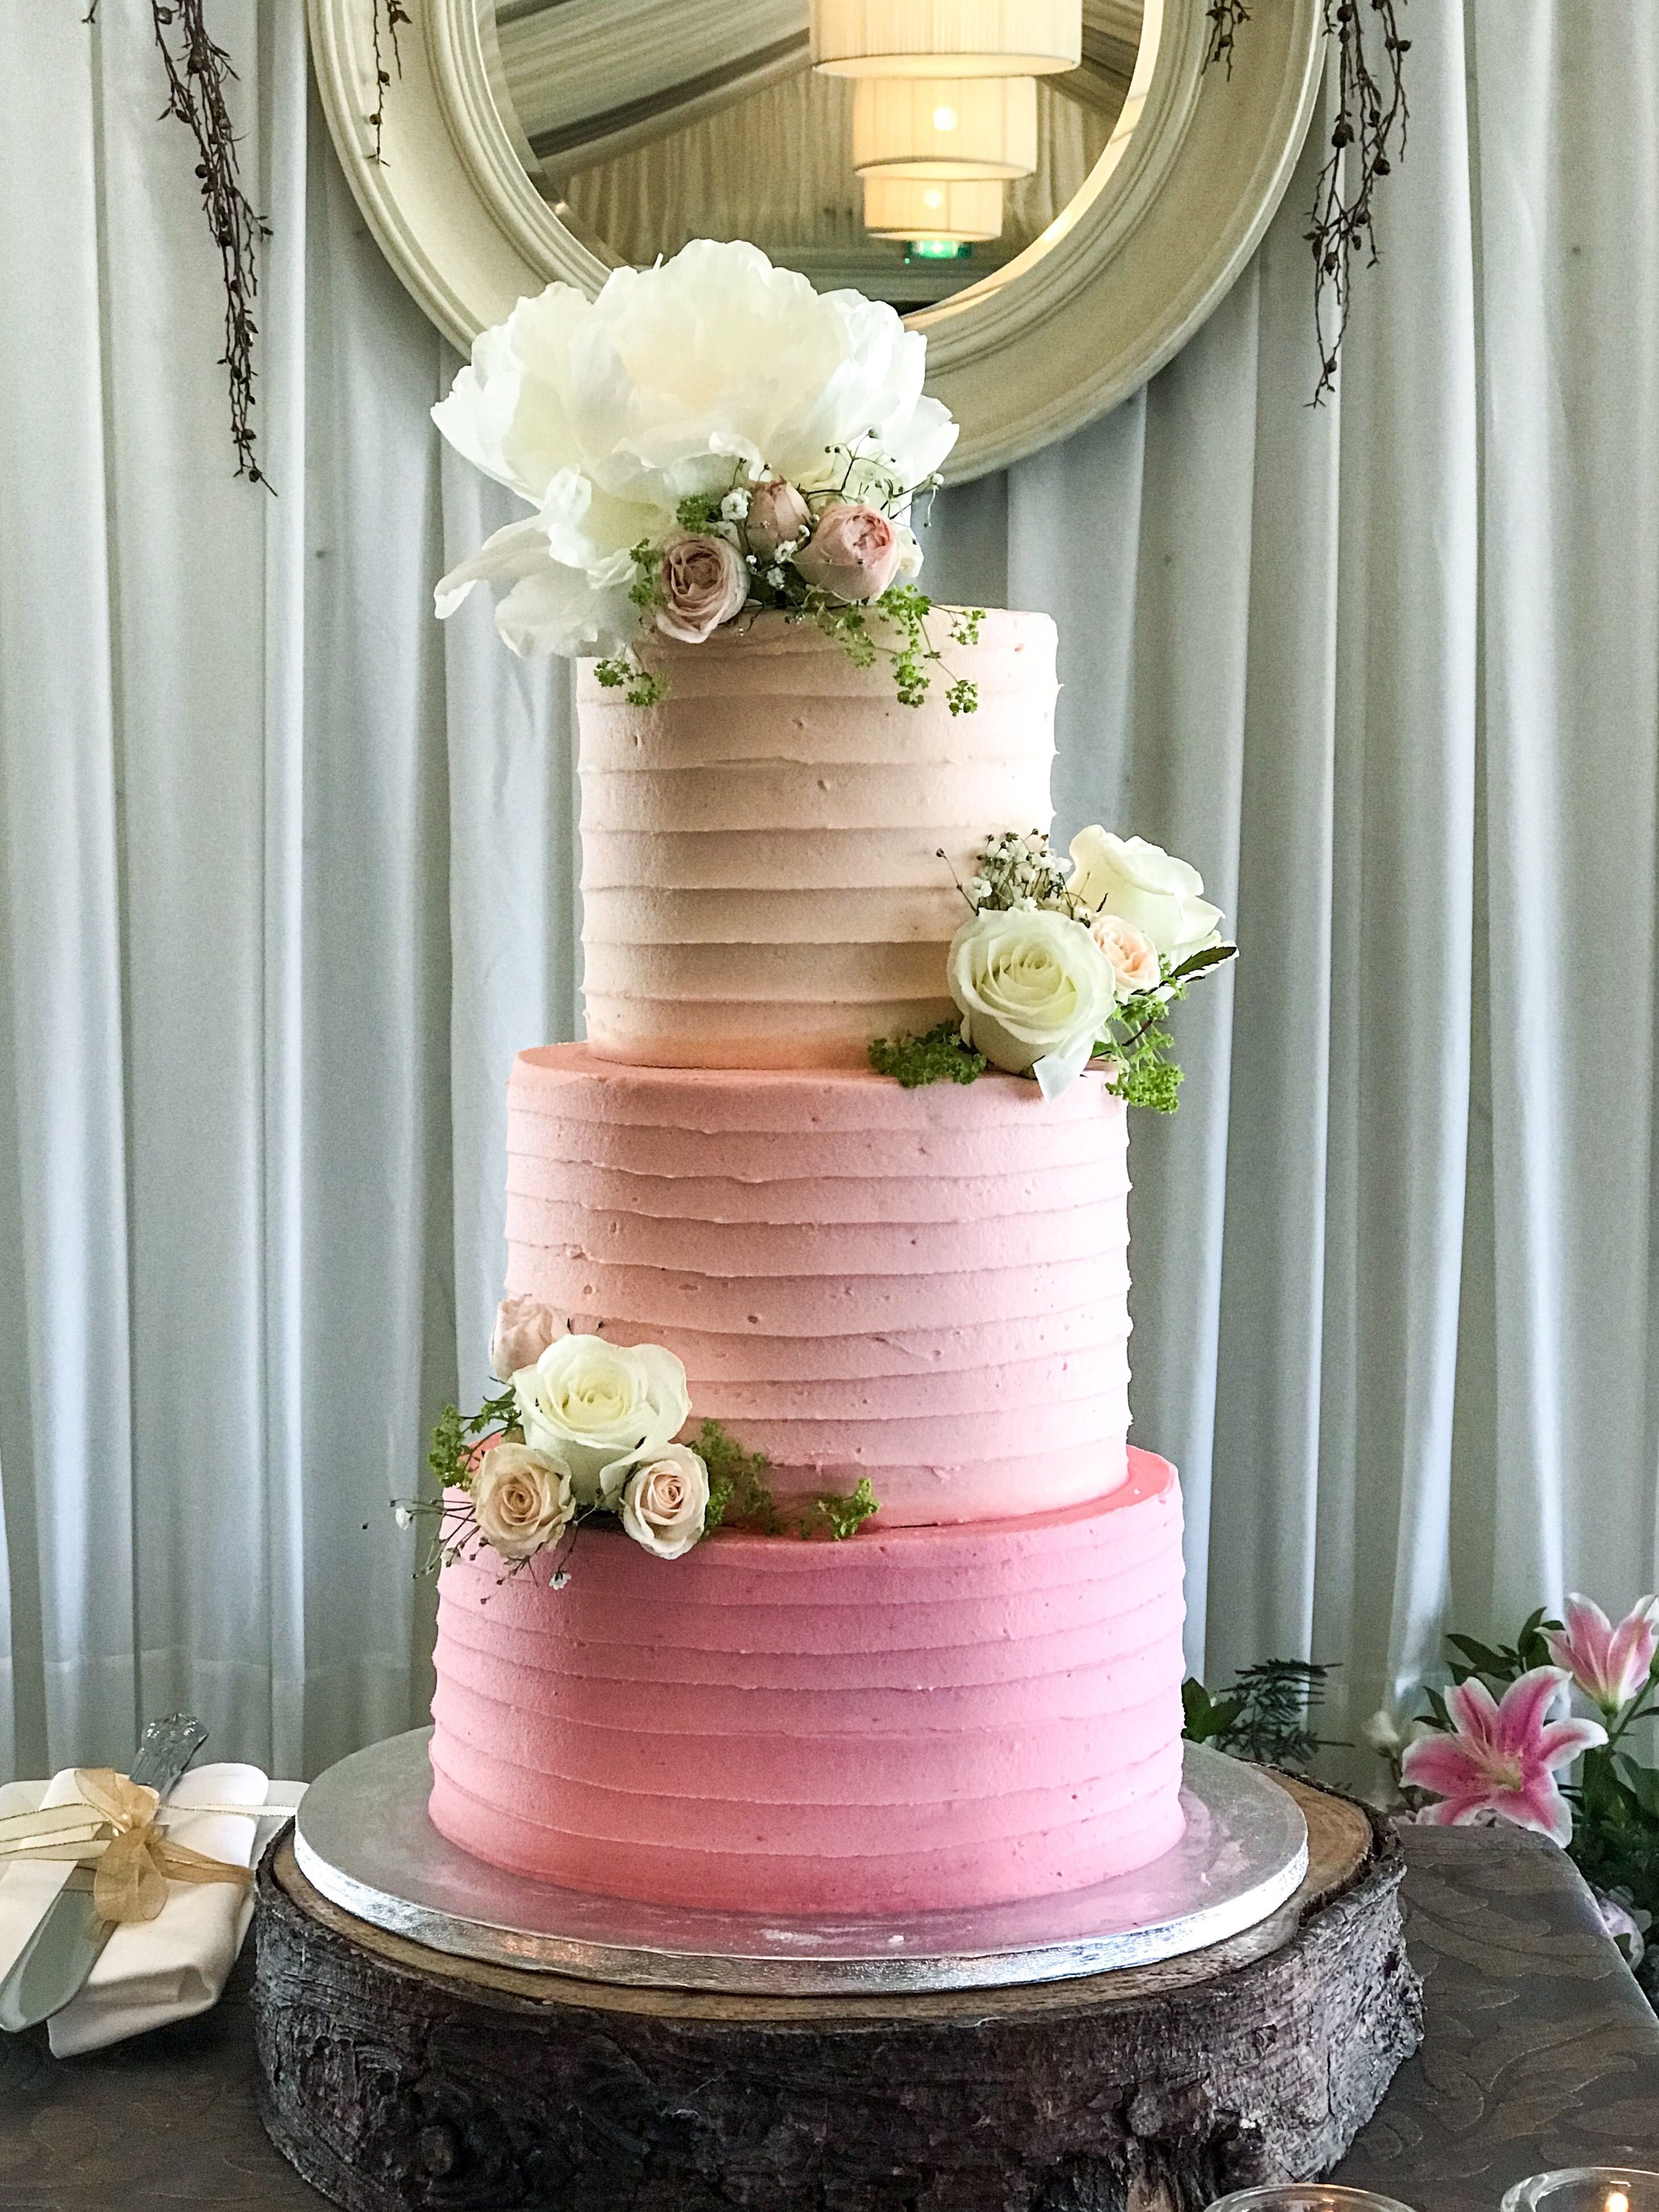 Pink Ombre Buttercream Iced Wedding Cake Decorated With Pretty